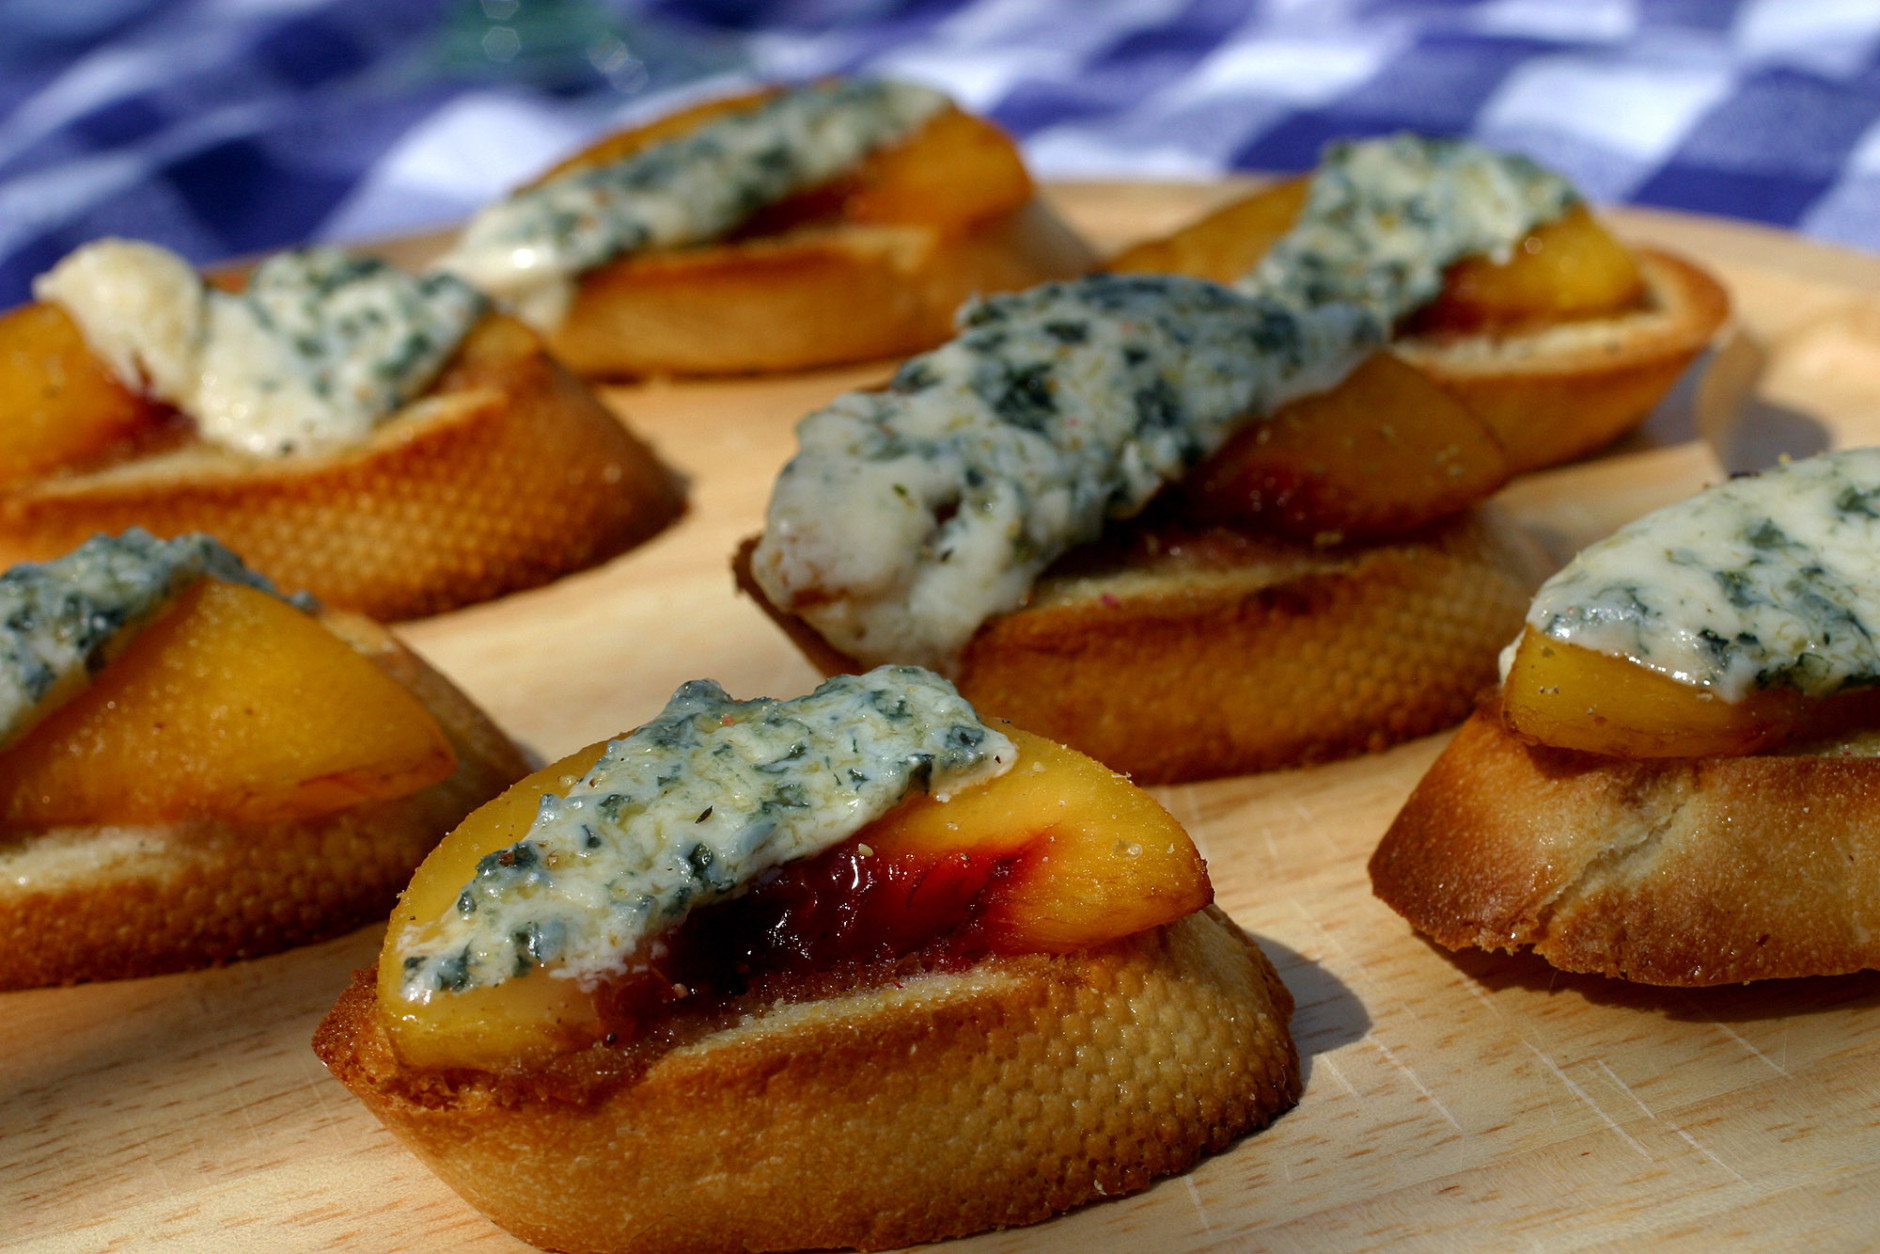 ** FOR USE WITH AP WEEKLY FEATURES **   Crostini With Peaches and Blue Cheese are made with a recipe from "Good Day for a Picnic" by Jeremy Jackson. Although not all the recipes in the cookbook may be suitable for taking out for a picnic meal, this one wins the label of outstanding. The crostini are assertively sweet and tangy and travel well. (AP Photo/Larry Crowe)